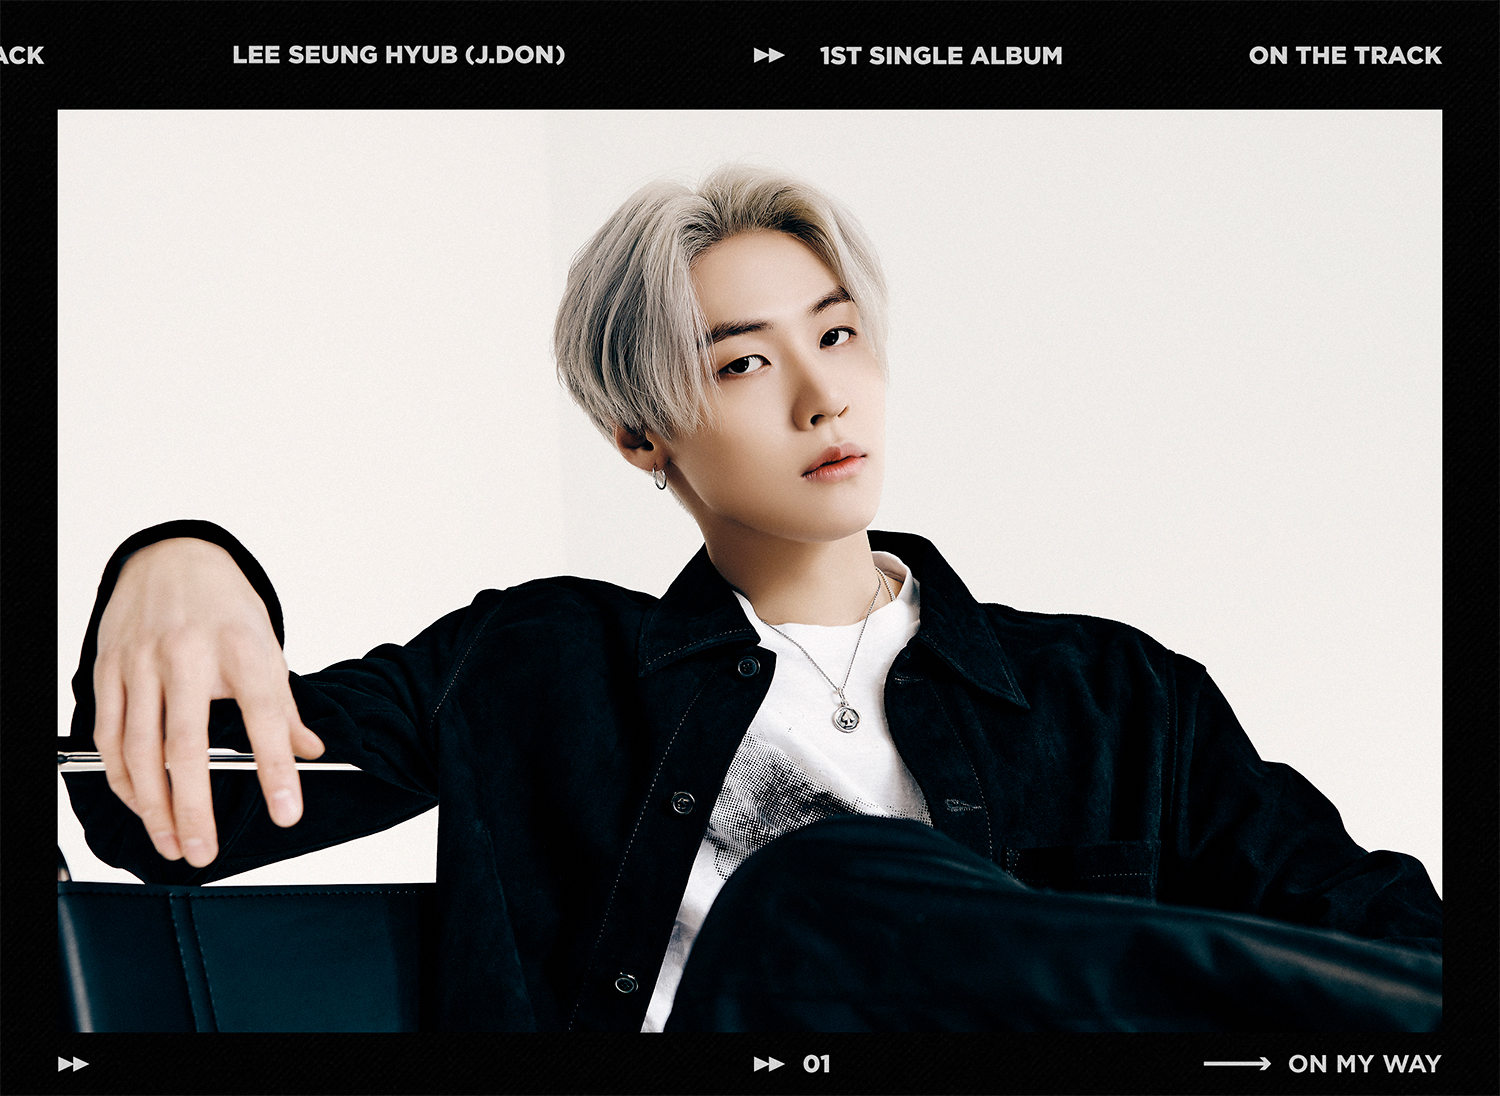 'Solo Debut' Lee Seung Hyub, Highlight Medley + Tracklist Revealed